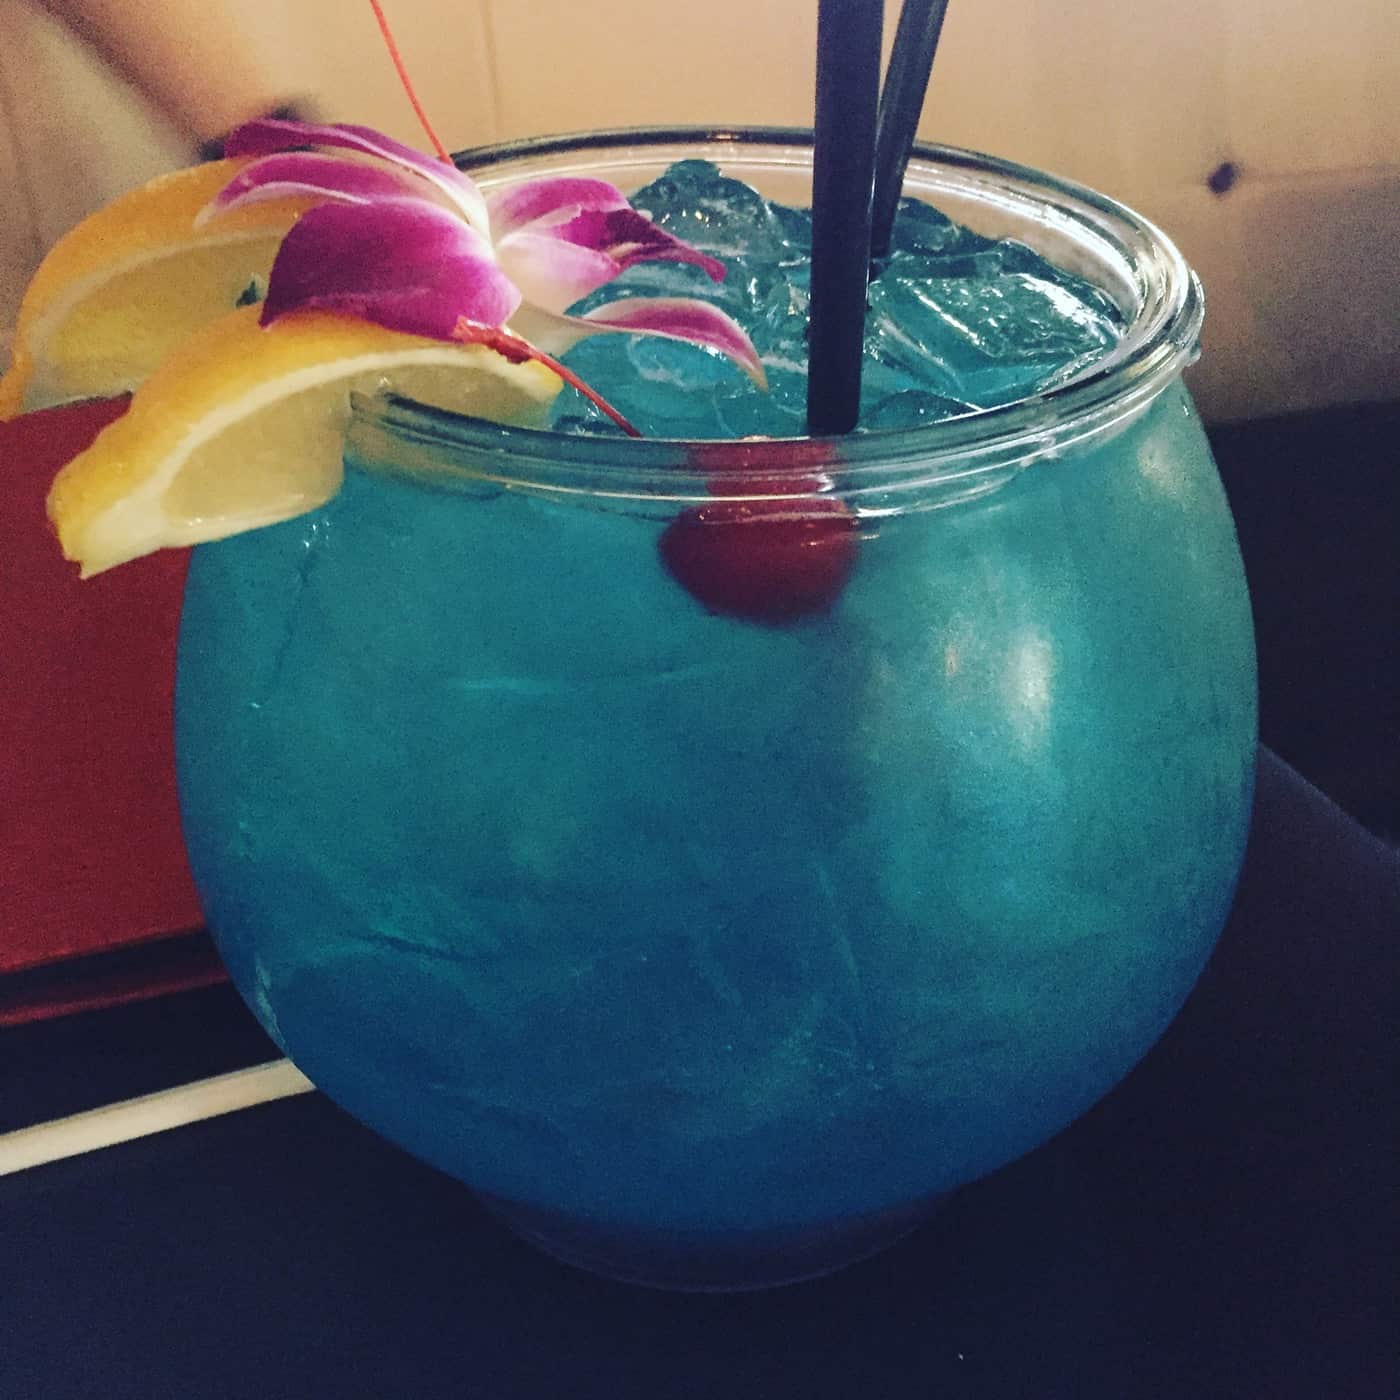 Proper use of fish bowl to hold fruity cocktail